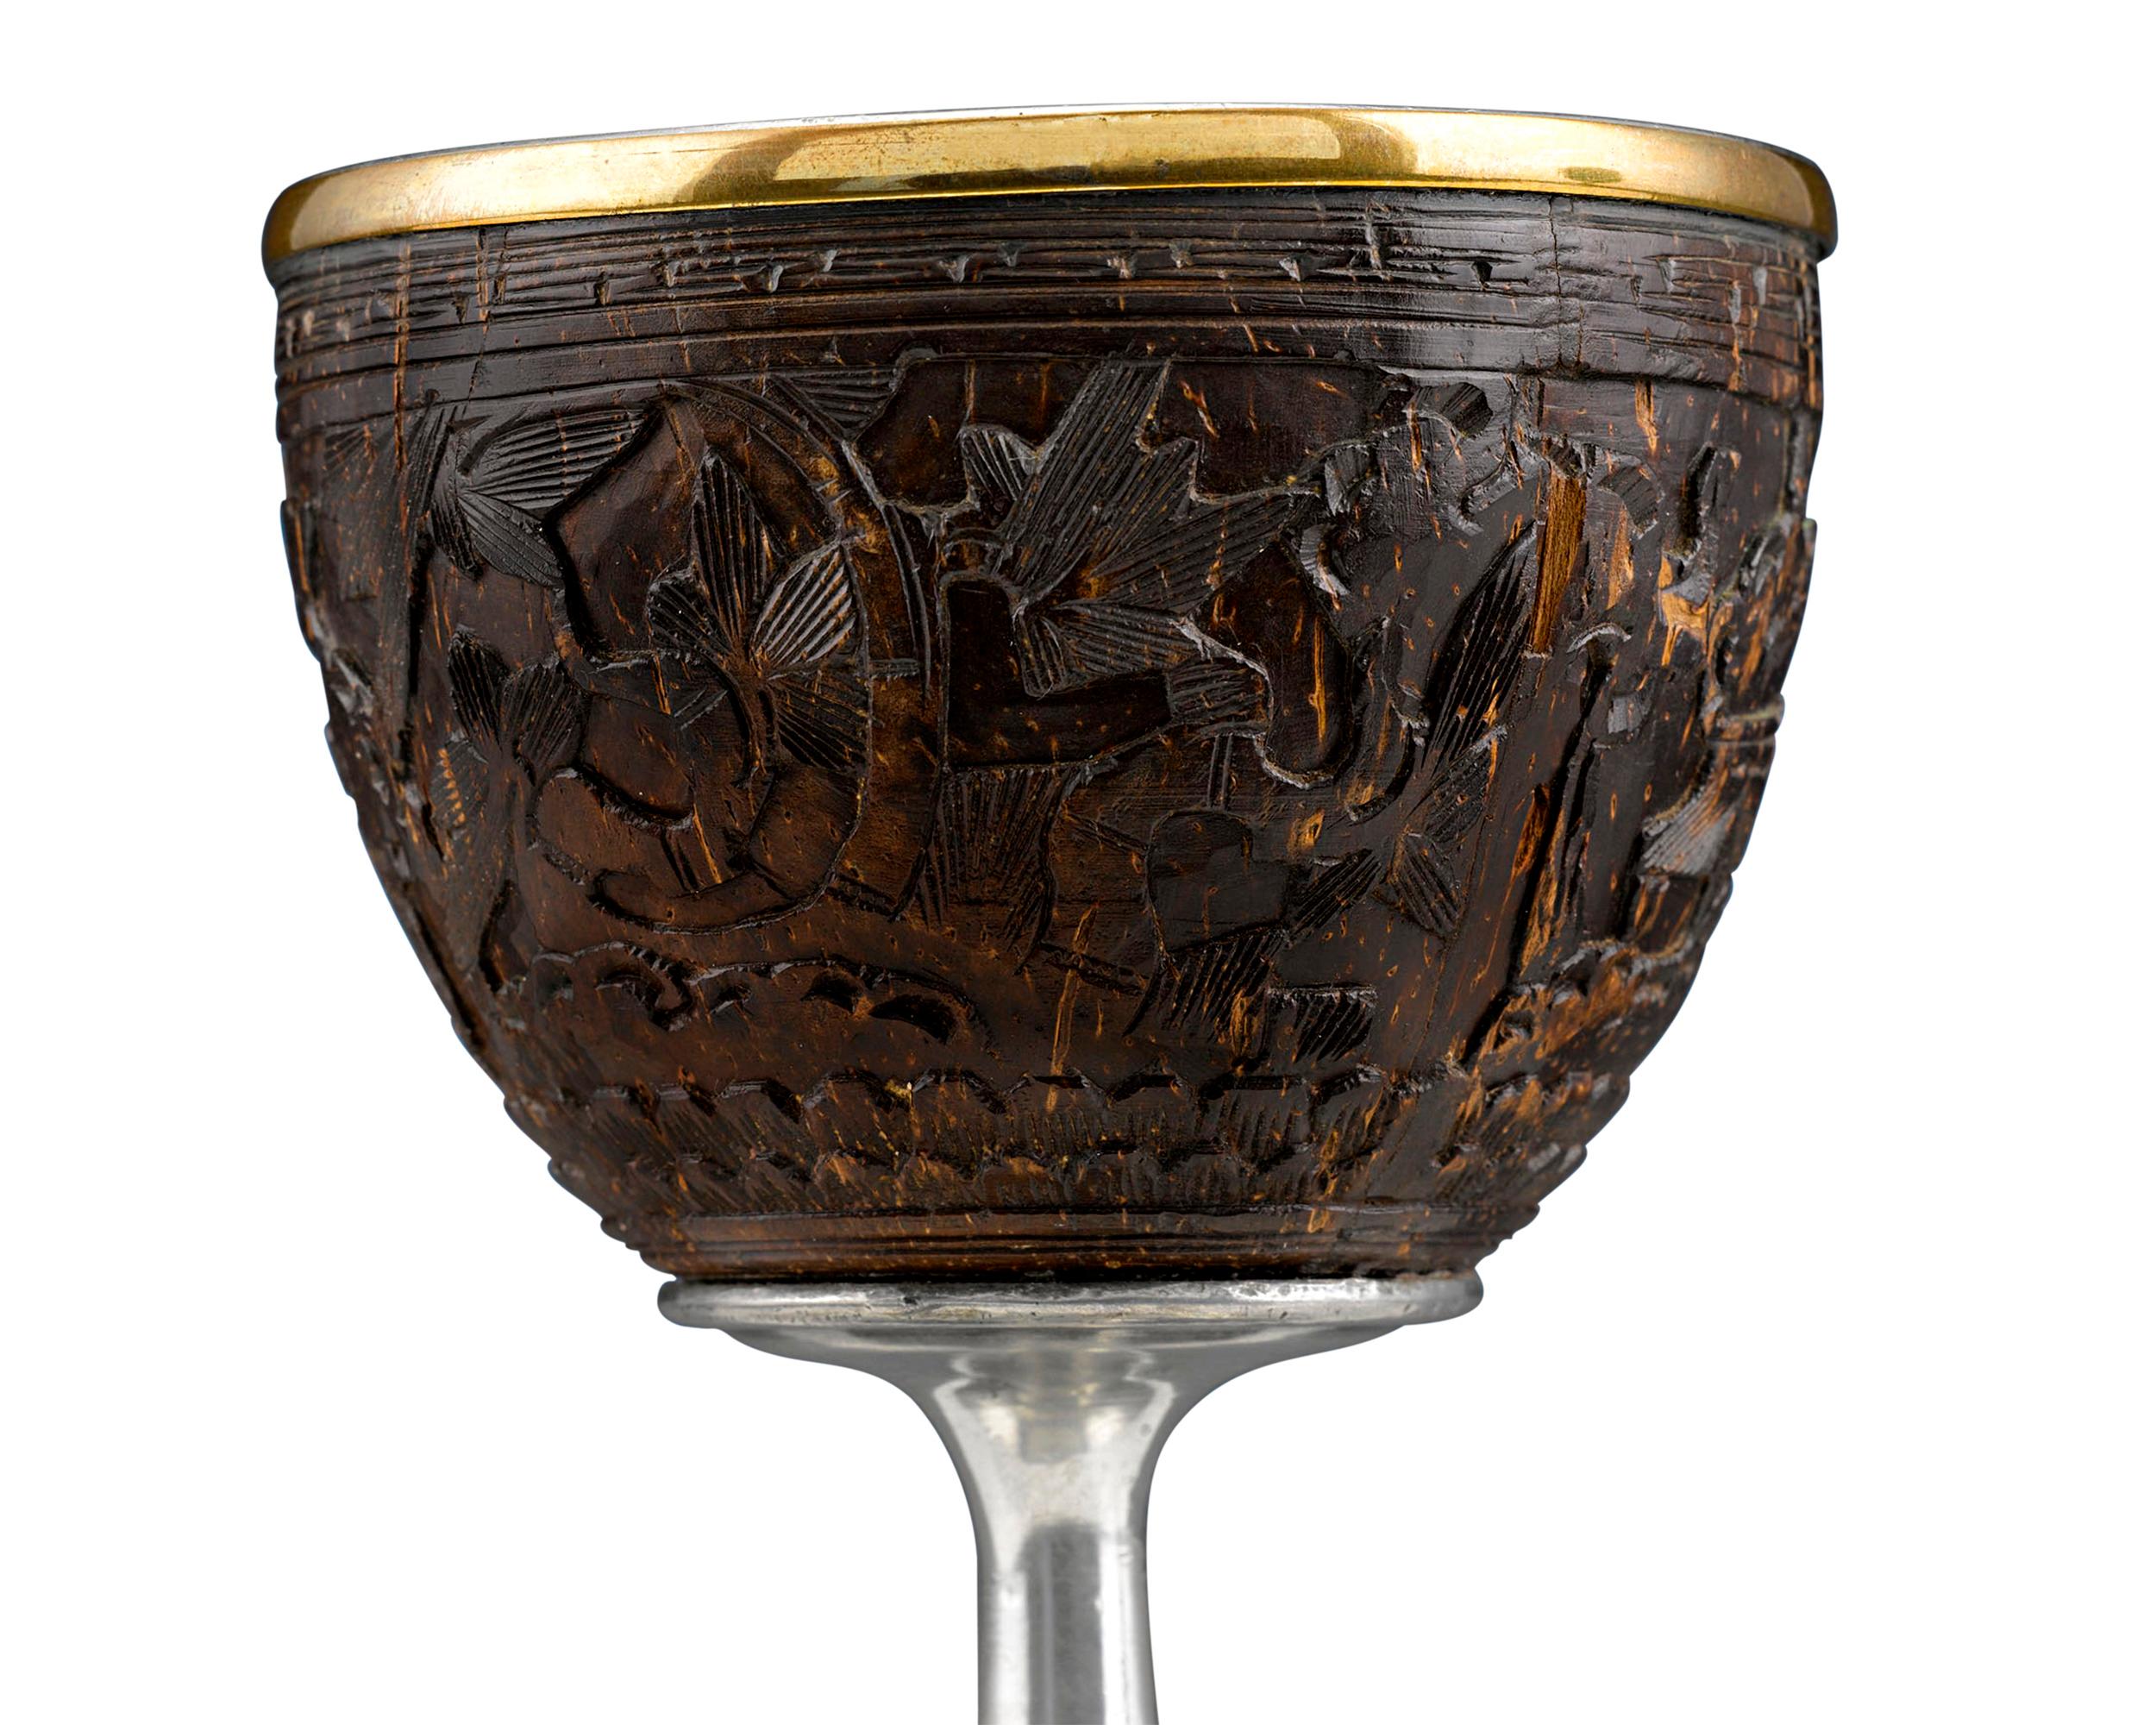 Carved from the shell of a coconut, this enchanting Chinese cup exhibits exceptional artistry. An elegant floral design encircles the entire cup, while the interior is fully lined with silver. In addition to the poison detecting powers attributed to